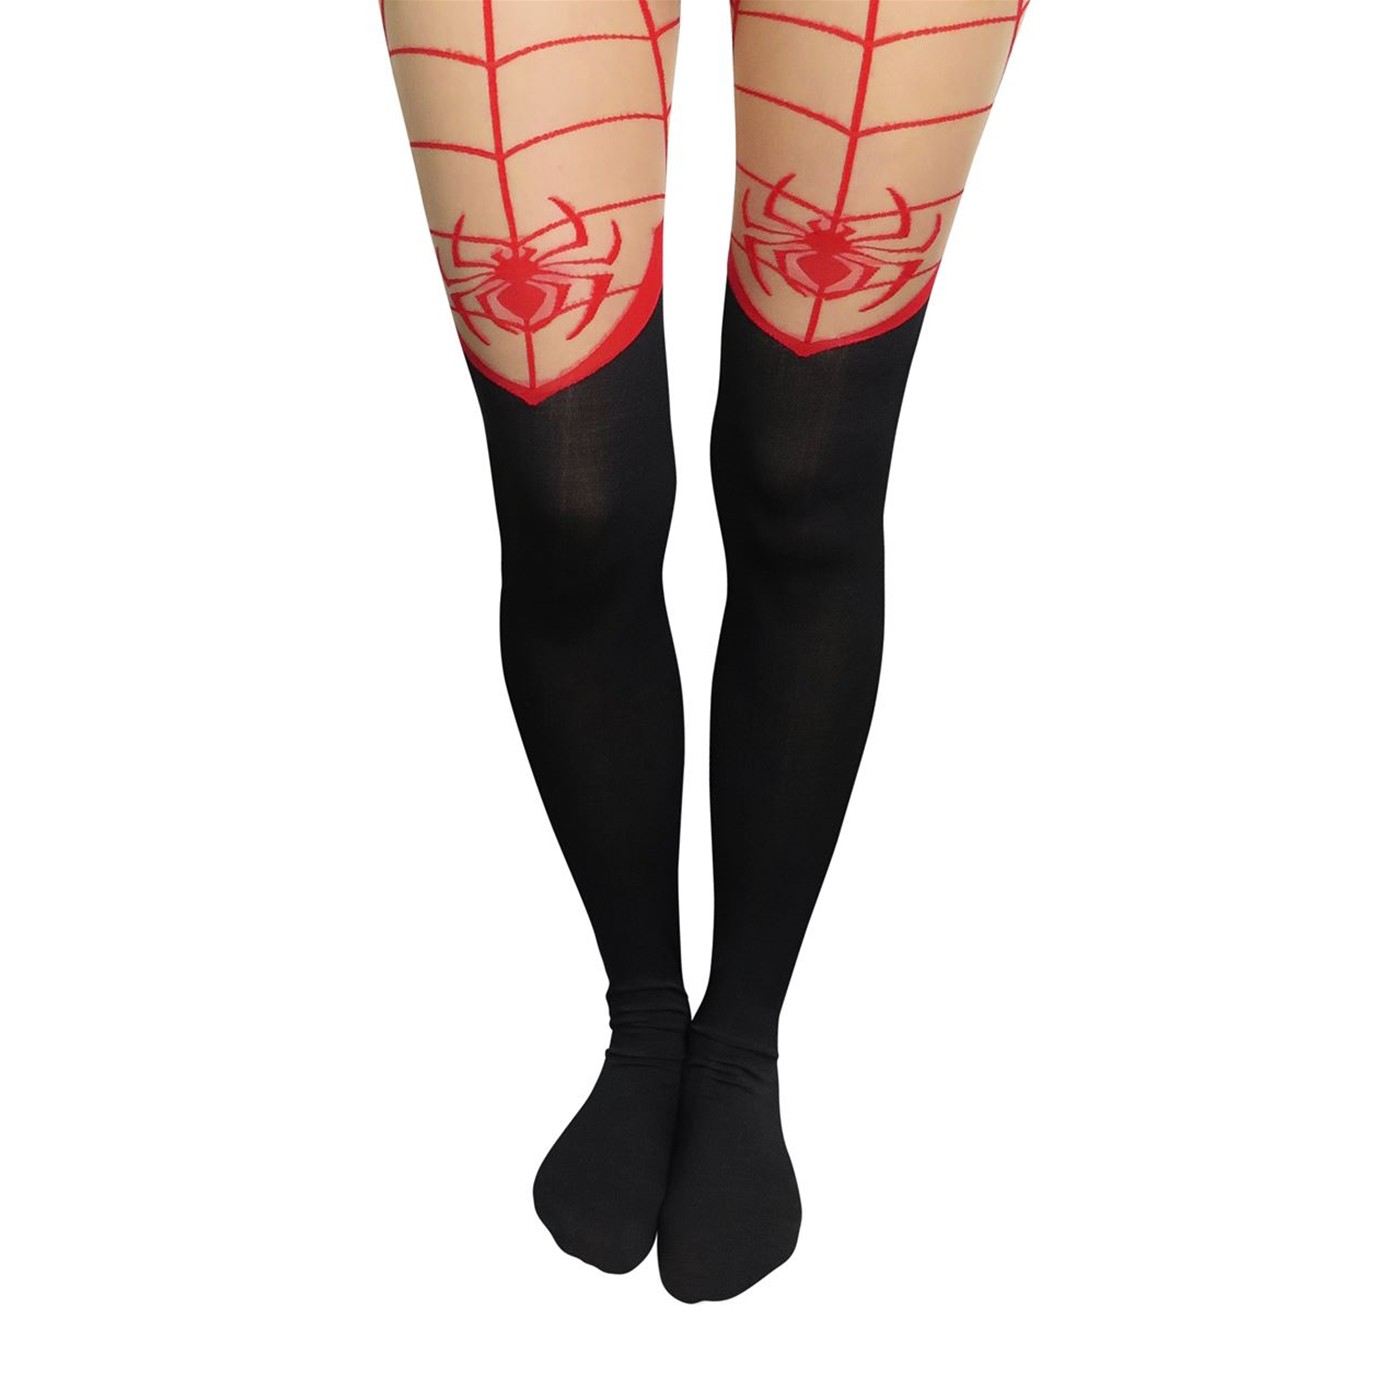 Ultimate Spider-Man Costume Women's Tights